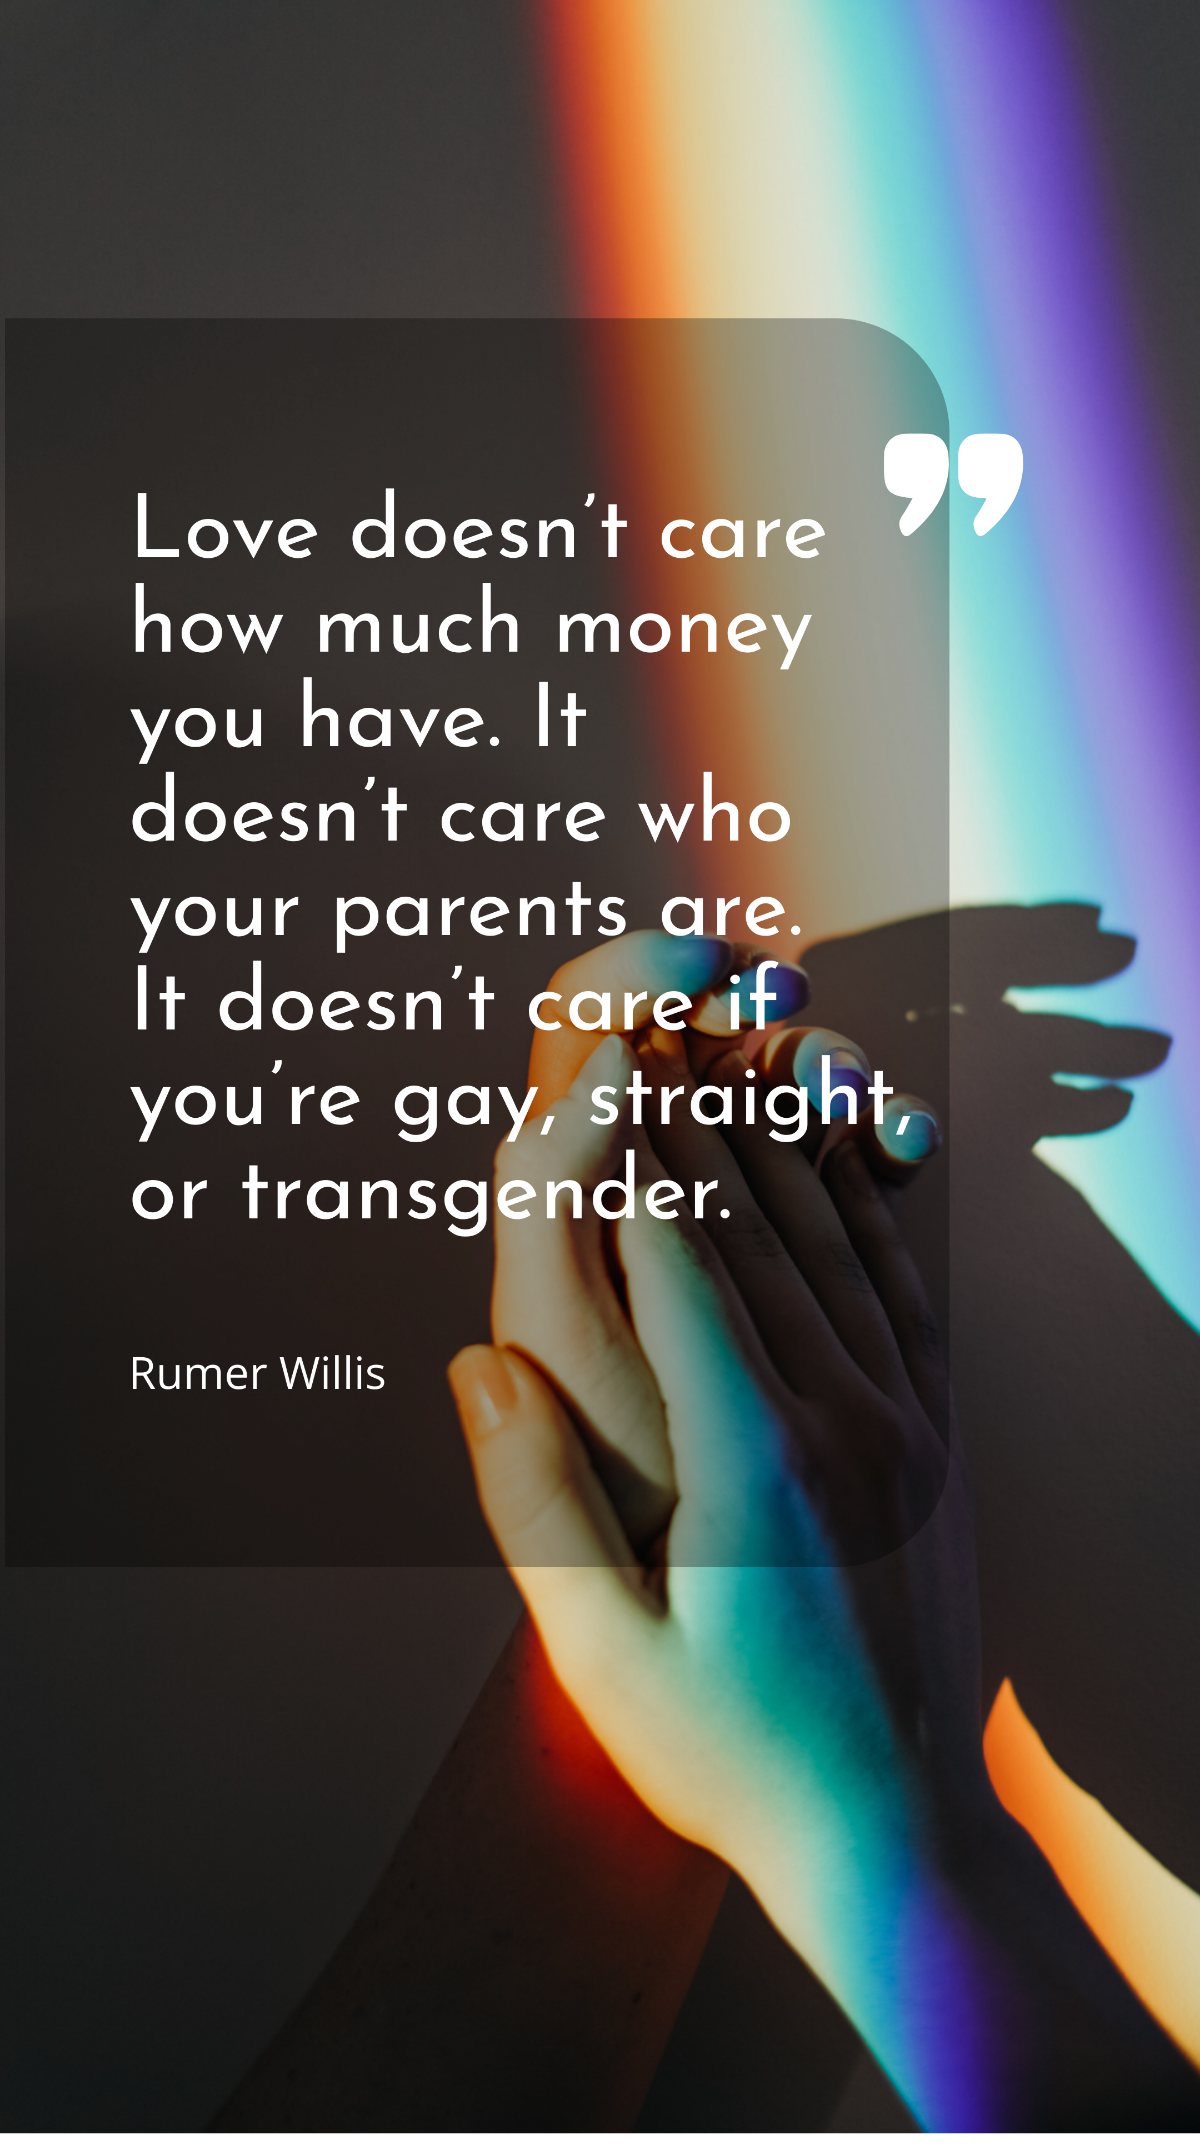 Rumer Willis - Love doesn’t care how much money you have. It doesn’t care who your parents are. It doesn’t care if you’re gay, straight, or transgender. Template